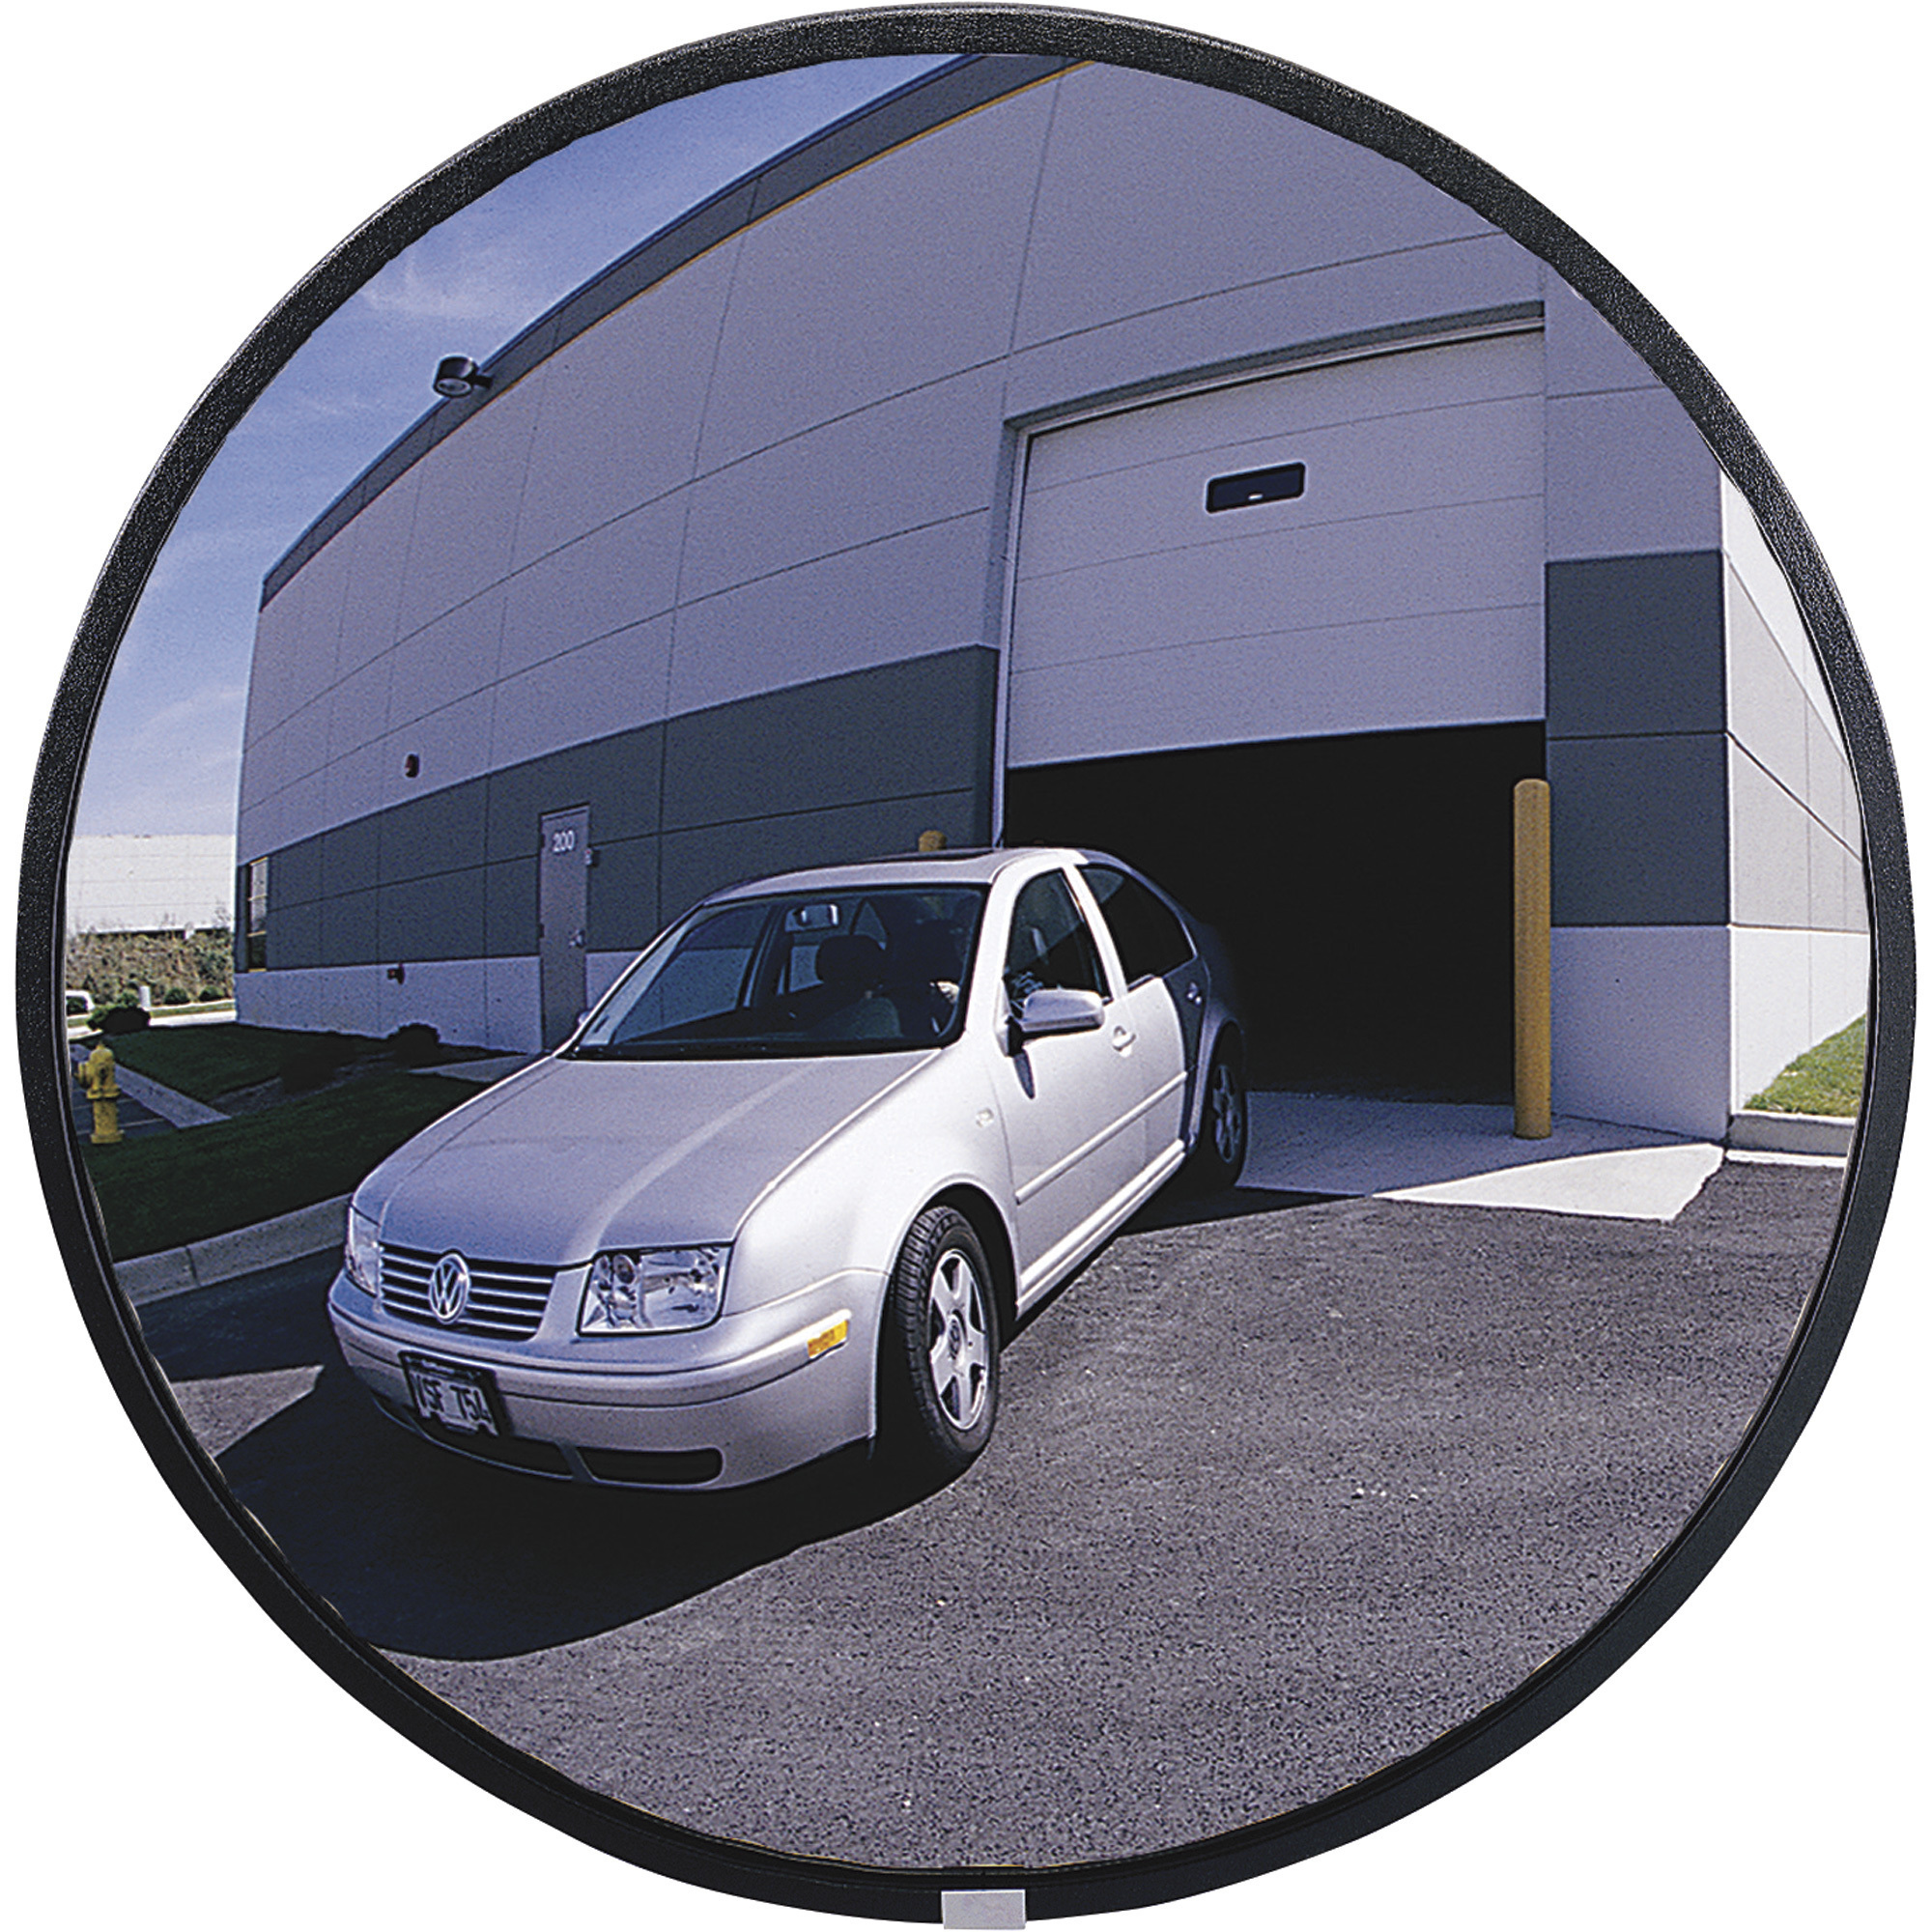 See All Outdoor Convex Safety Mirror â 36Inch Diameter, Acrylic, 40-Ft. View, Model PLX036